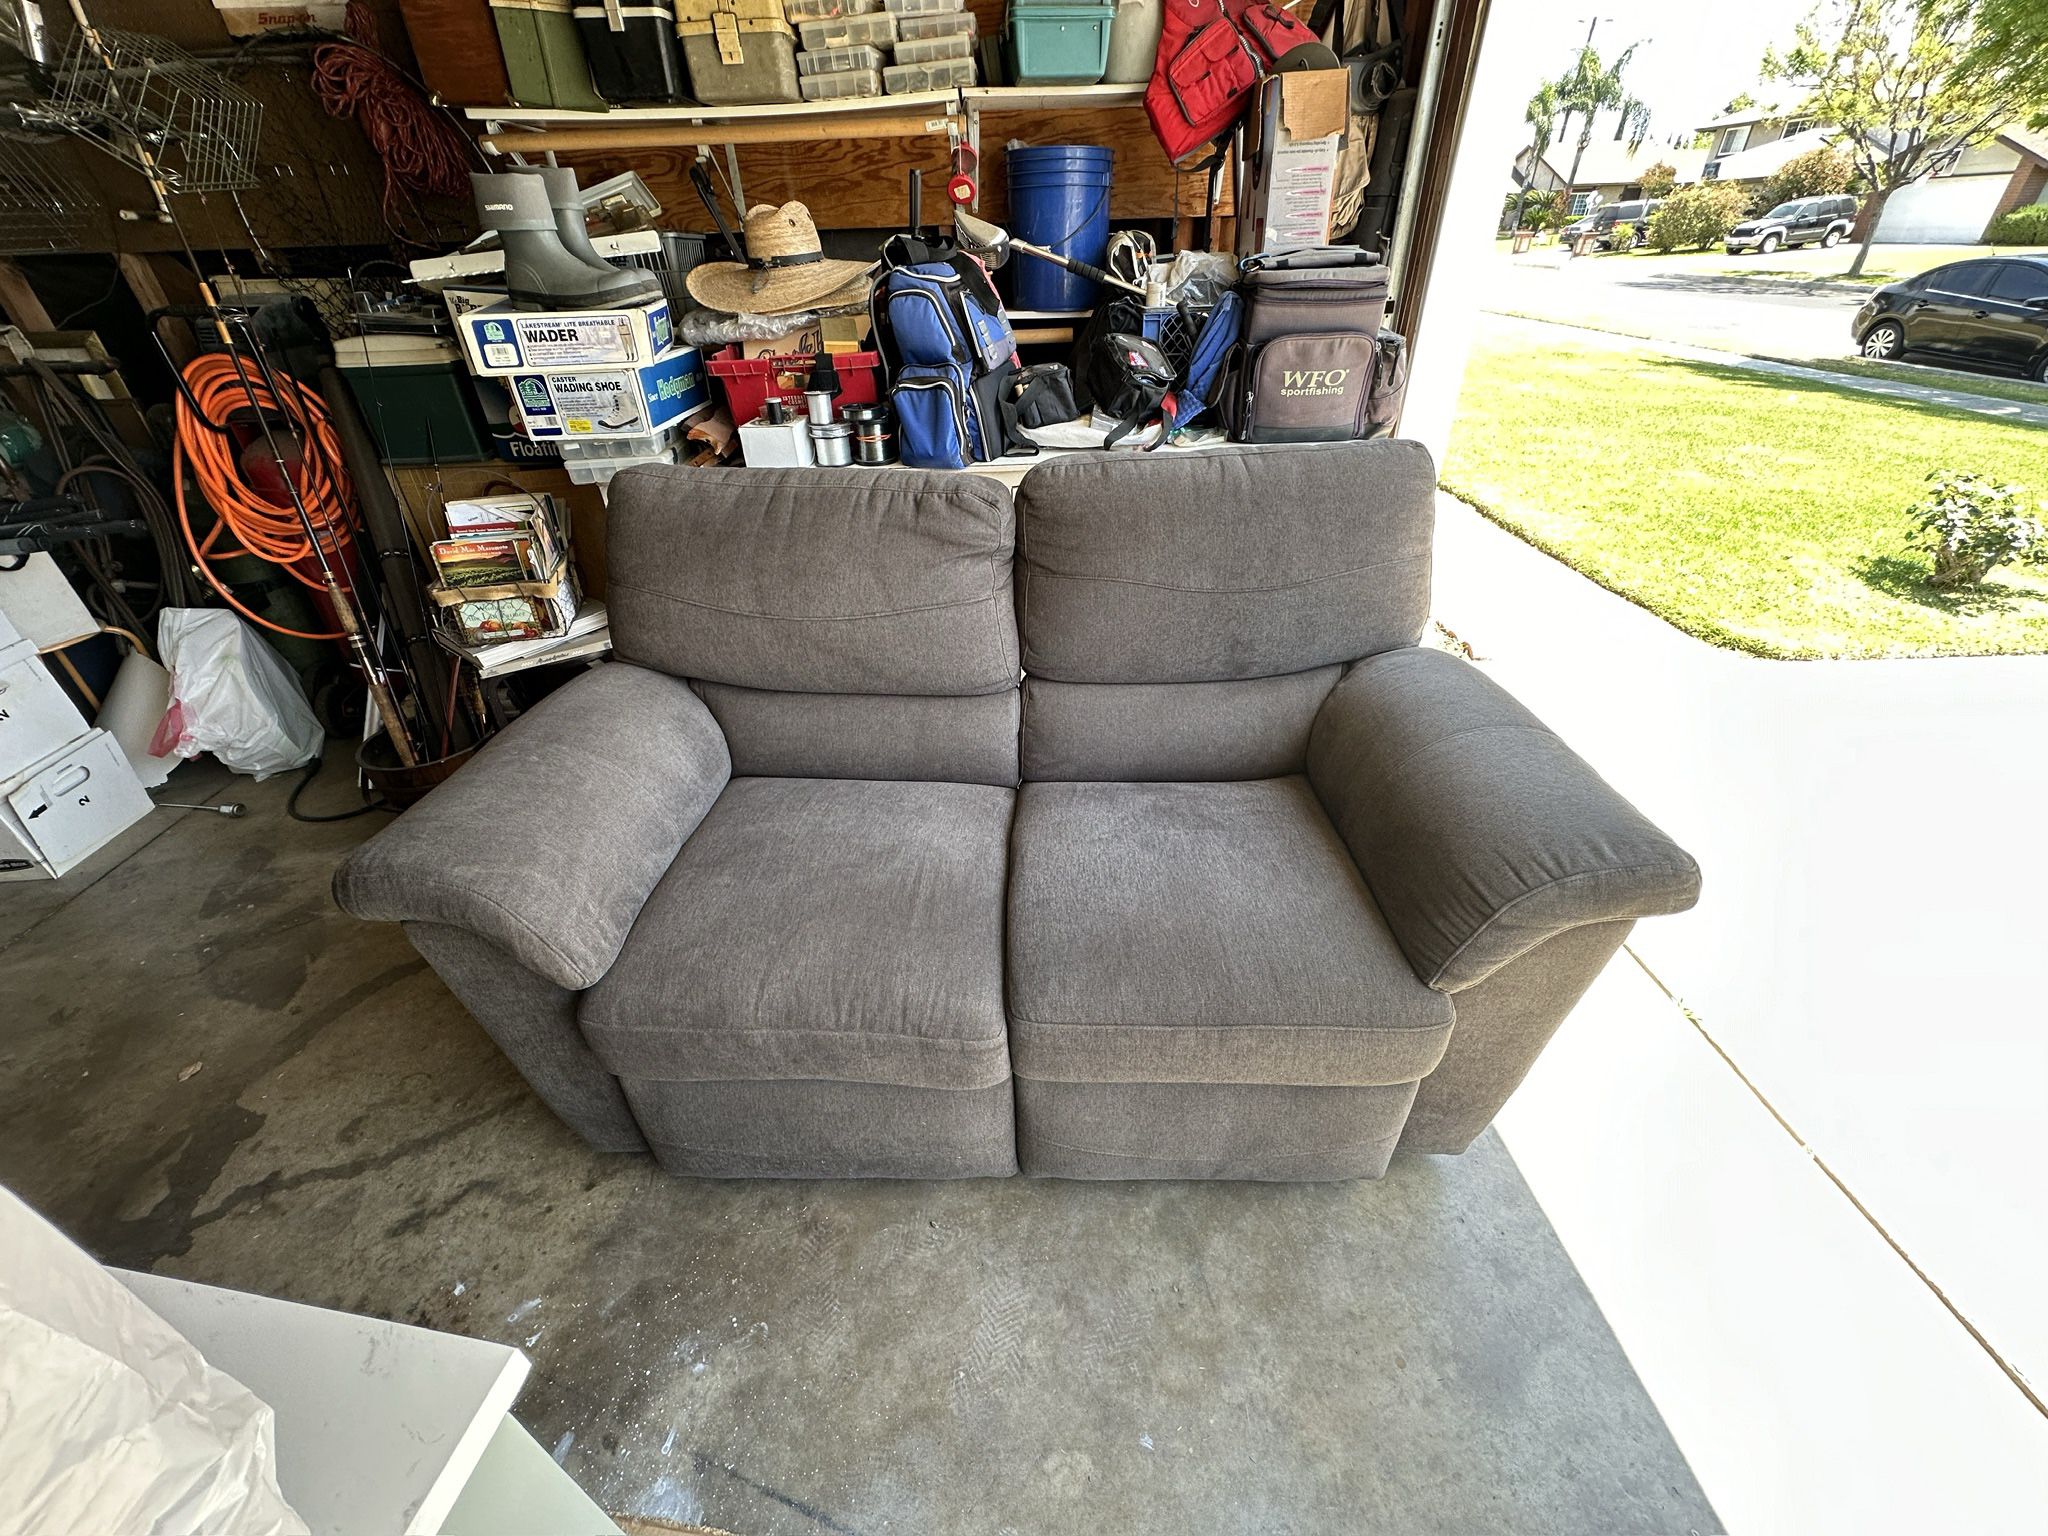 Lazy boy Recliner Couch